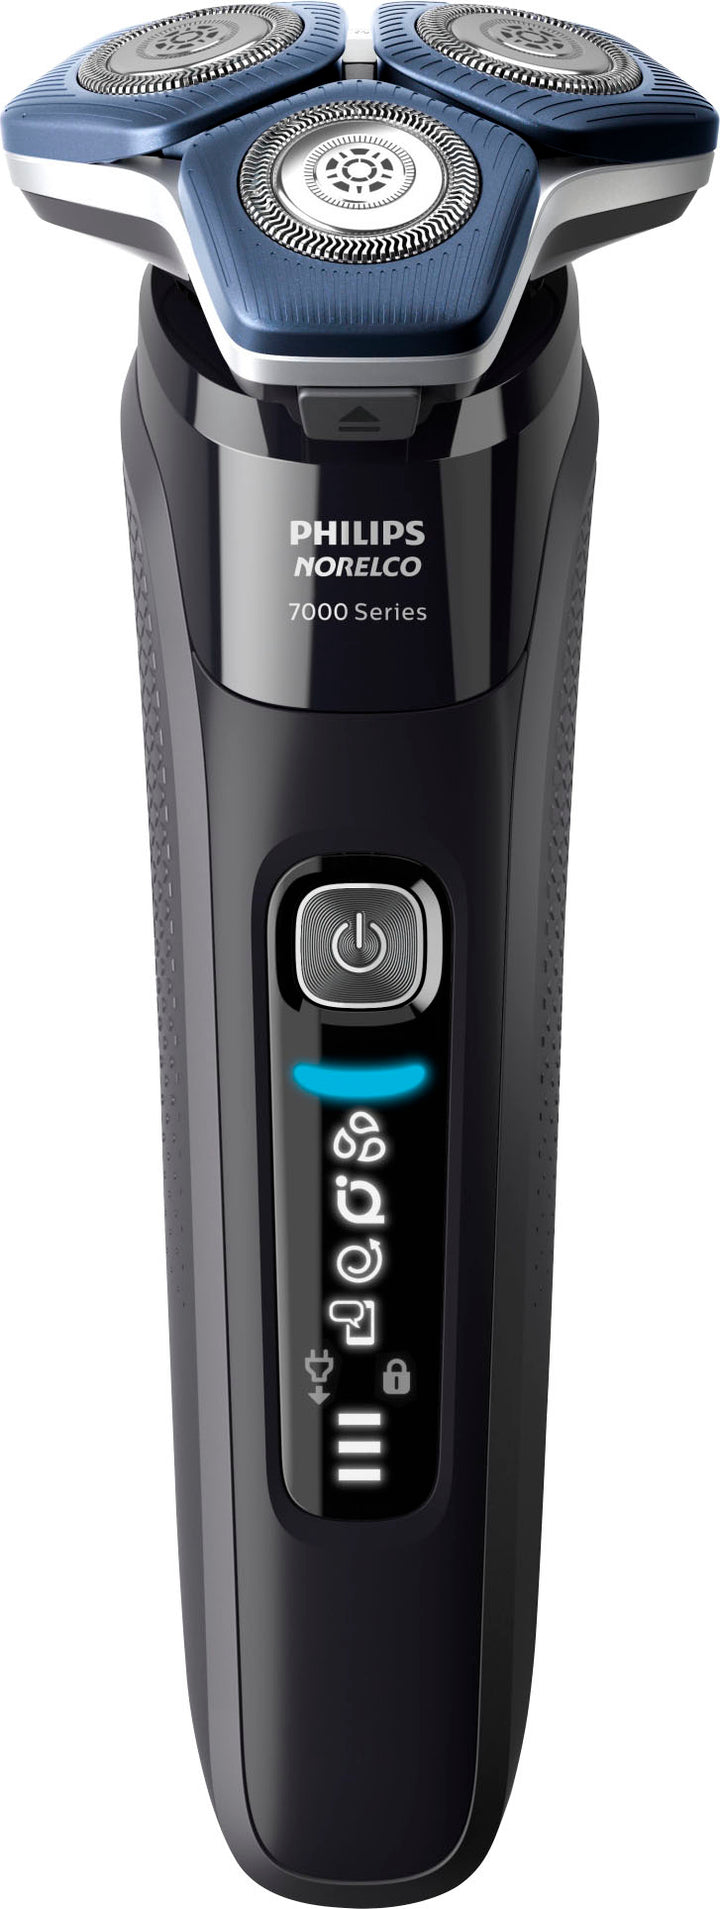 Philips Norelco Shaver 7600, Rechargeable Wet & Dry Electric Shaver with SenseIQ Technology, S7886/84 - Black_5